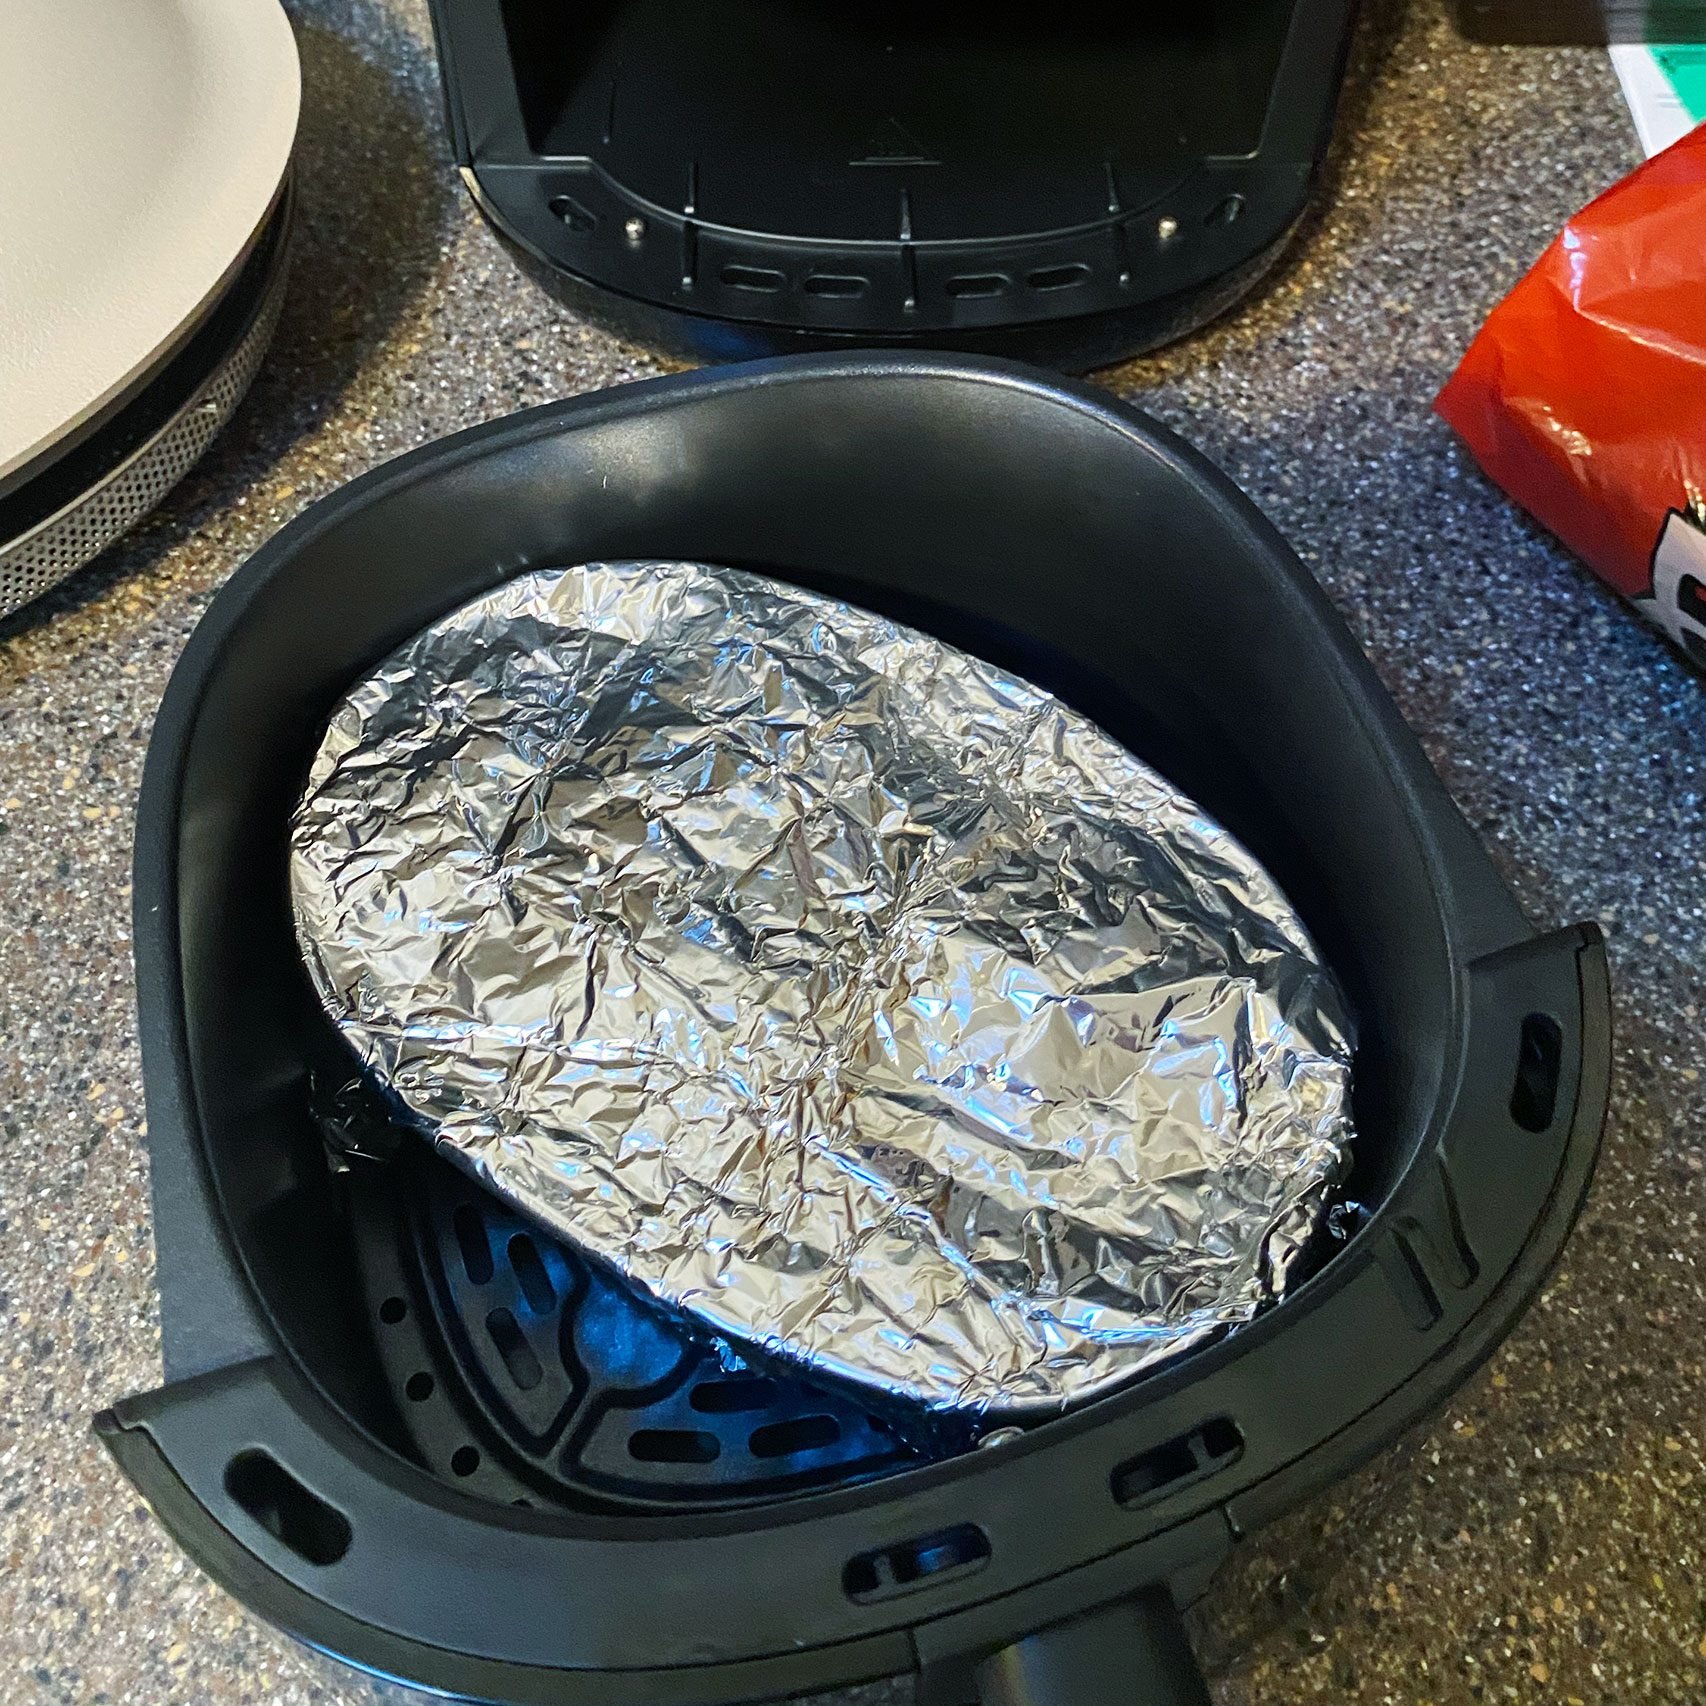 The Effortless Foil Hack For A Non-Stick Cooking Experience